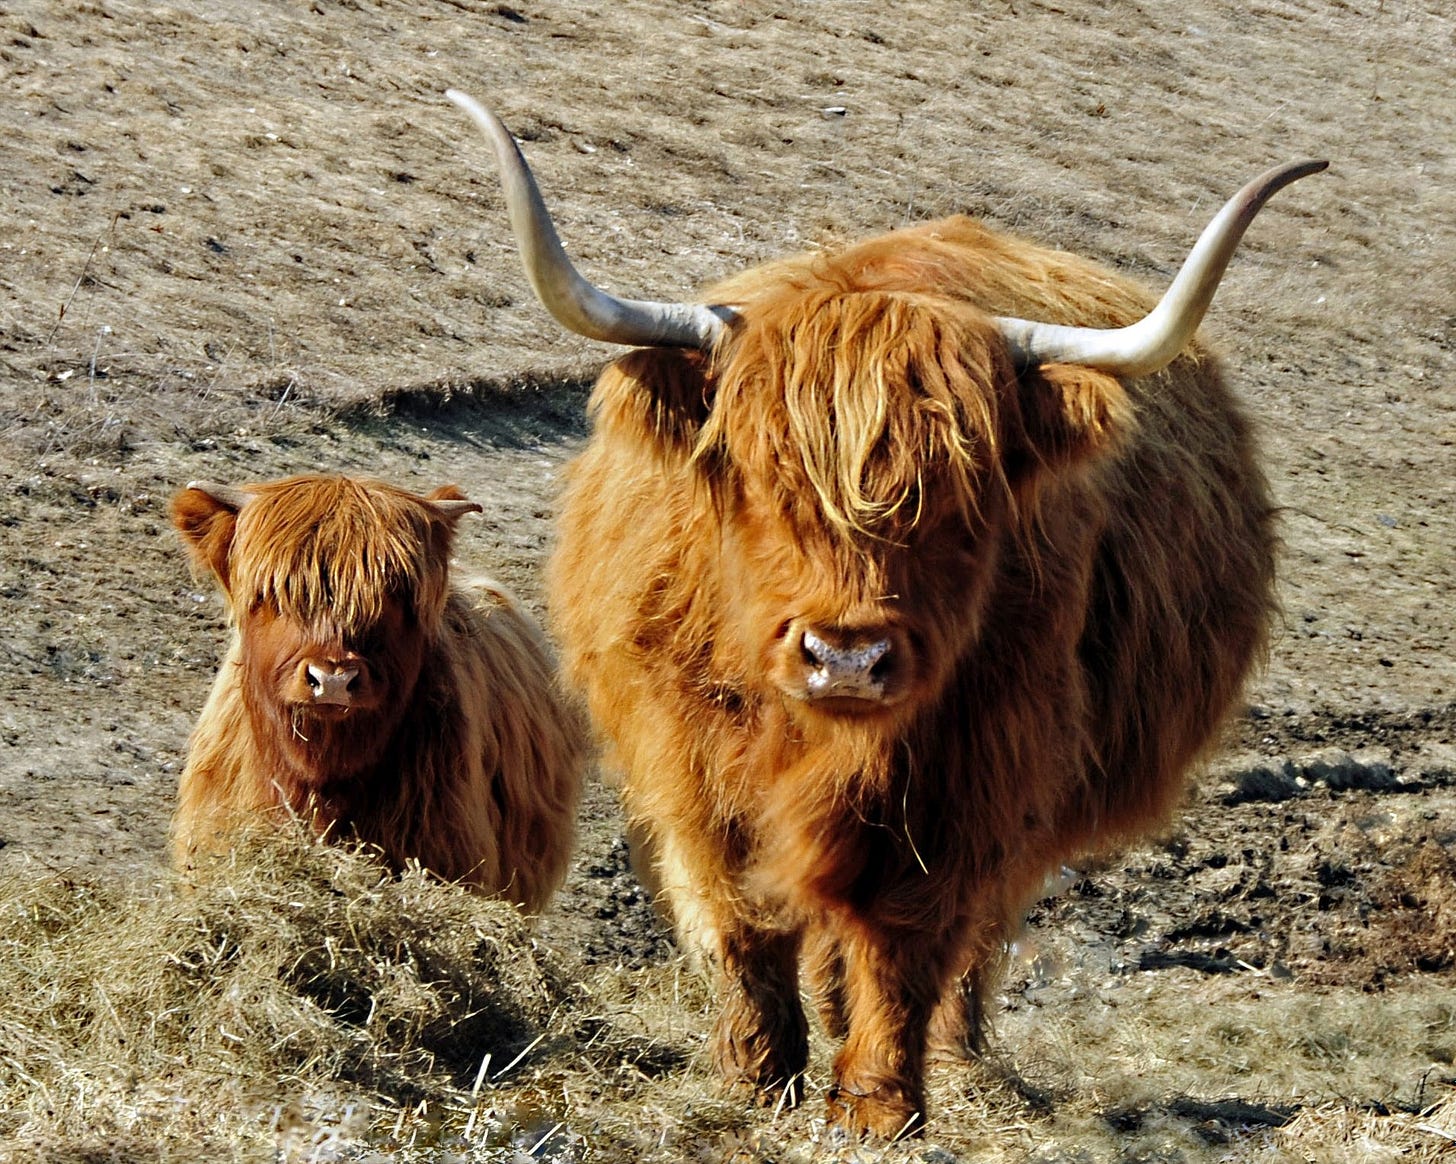 File:Highland Cow and Calf.jpg - Wikimedia Commons